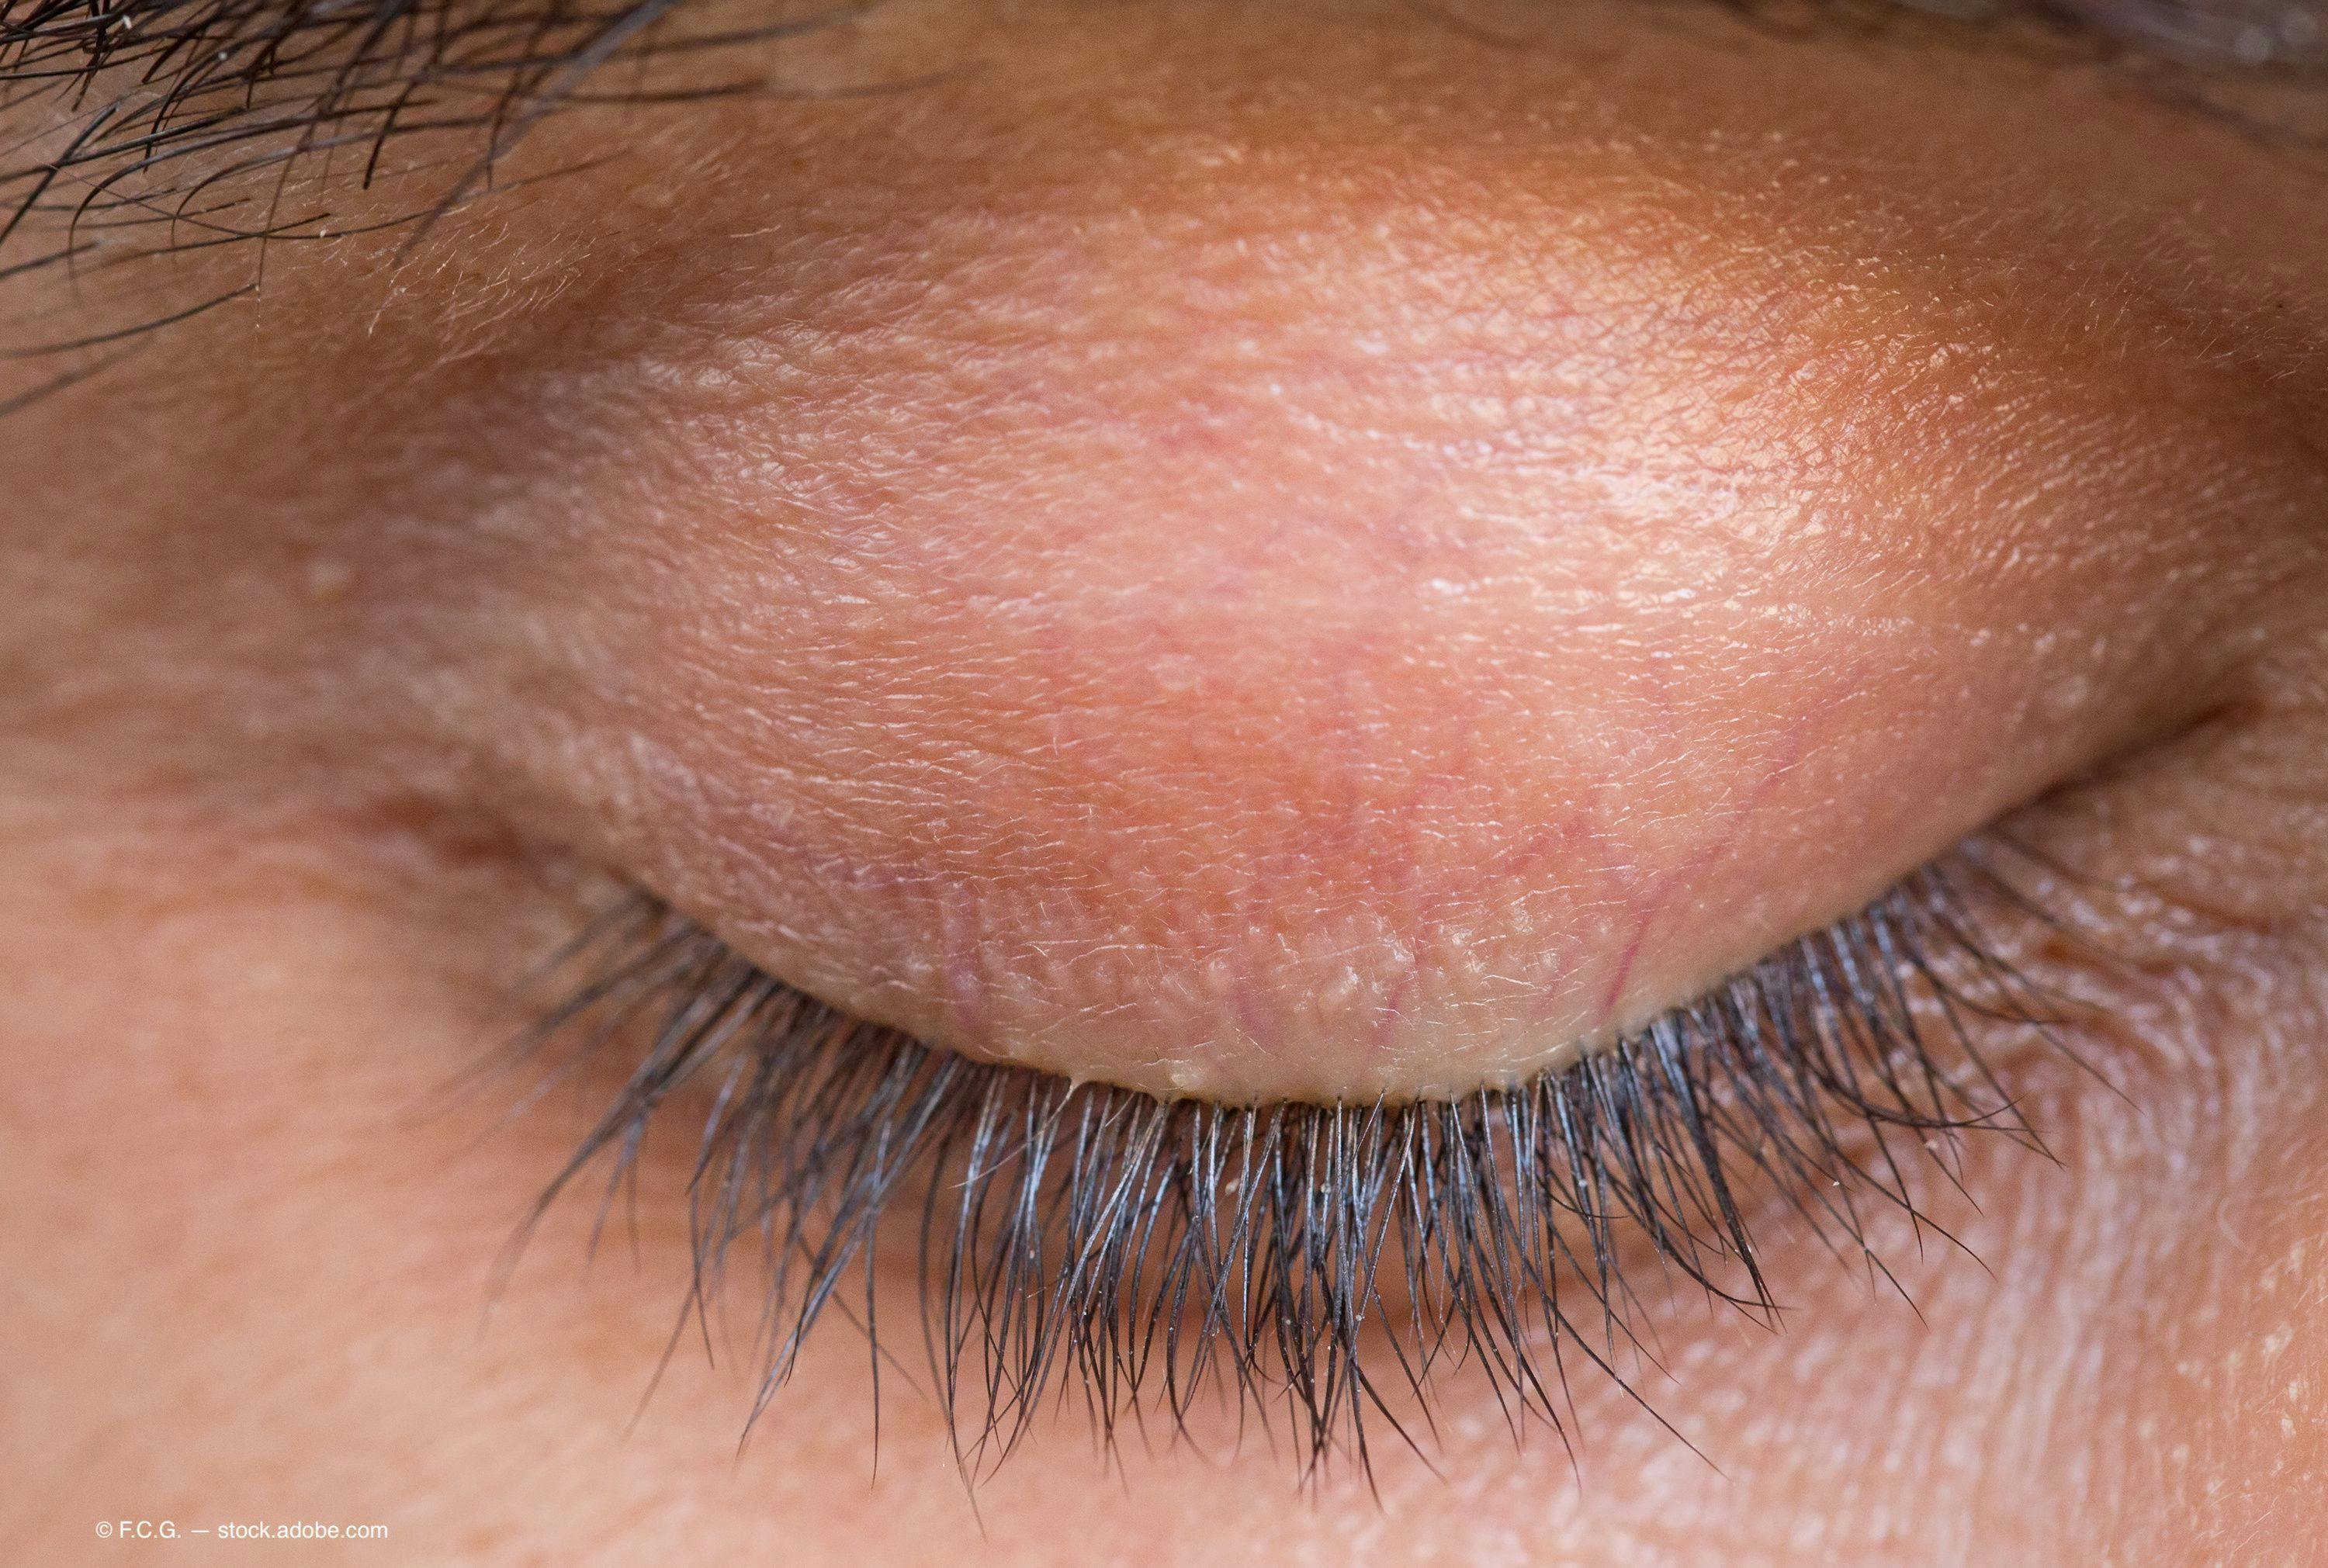 Upper lid elevation with topical oxymetazoline 0.1%: providing a better view